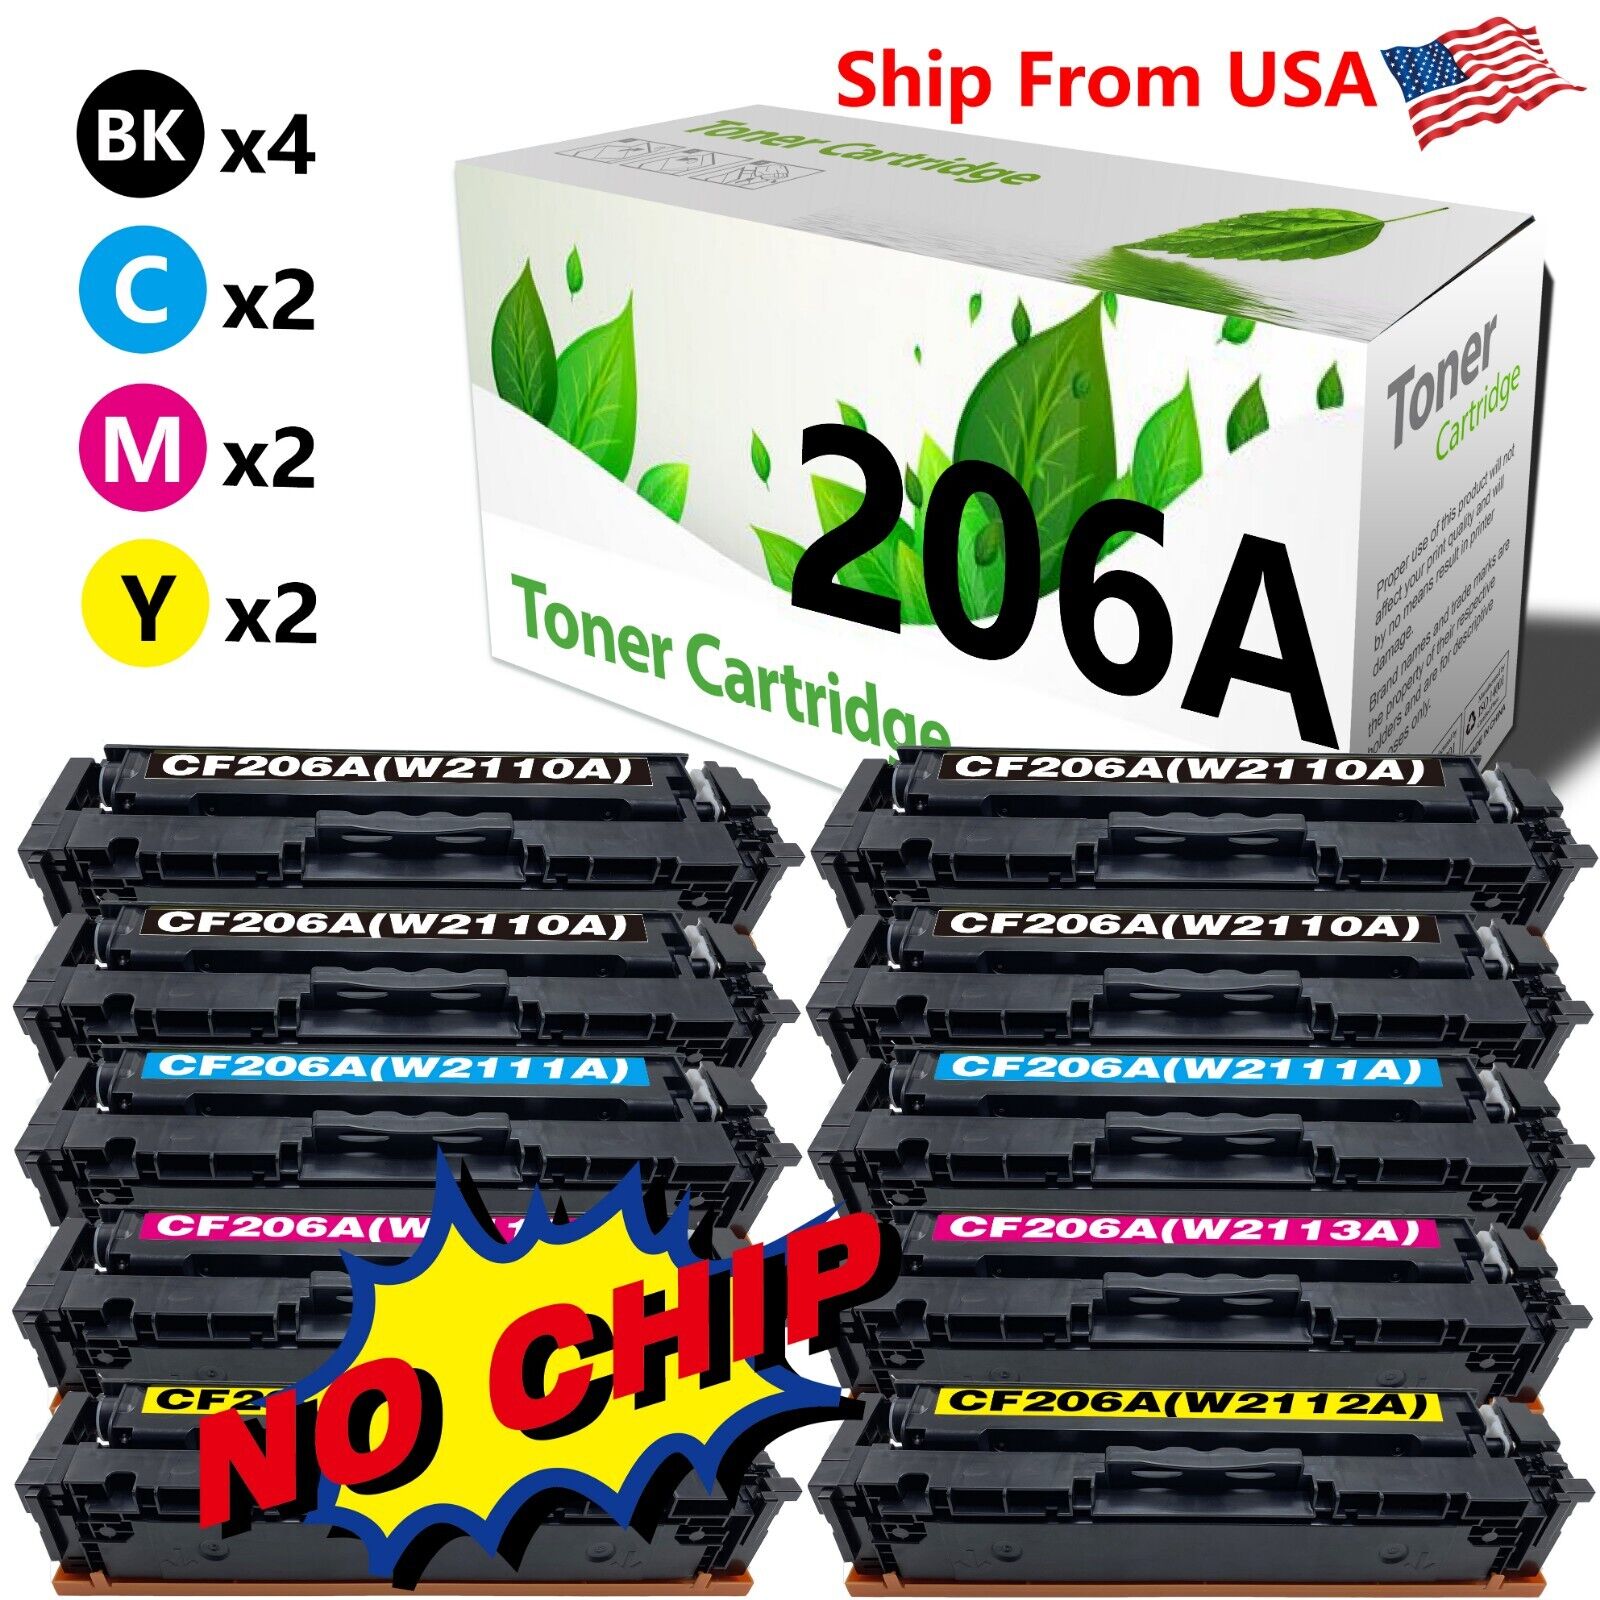 10Pack CF206A Toner Cartridges W2110A-13A no chip for M282nw M283cdw M283fdn